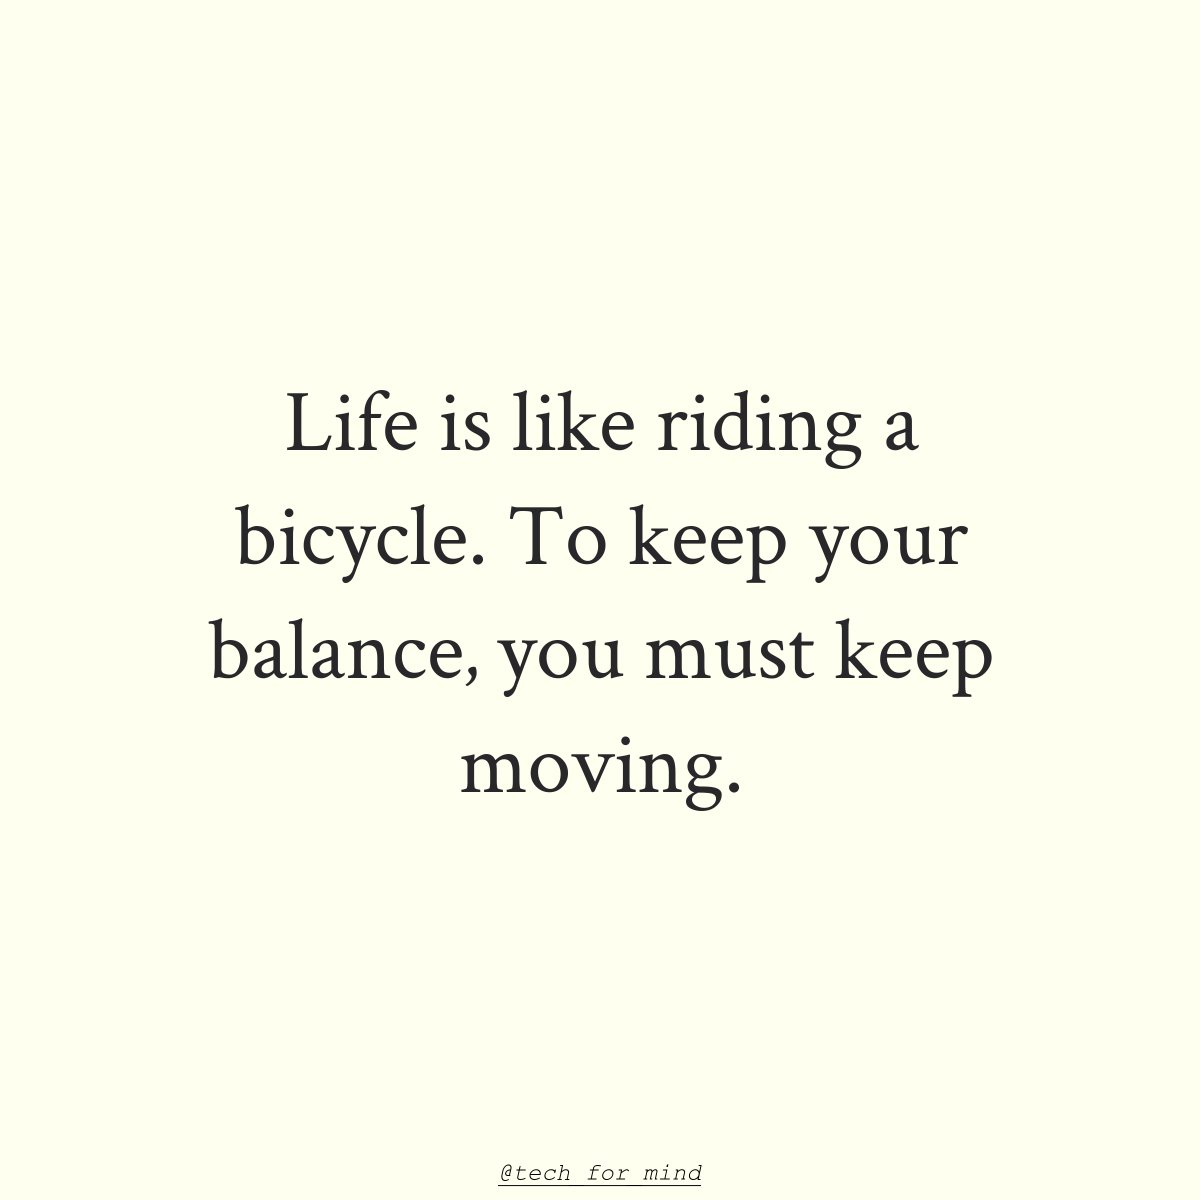 What's your favorite way to stay motivated and keep moving forward? 🚲
#MotivationMonday #Inspiration #NeverGiveUp